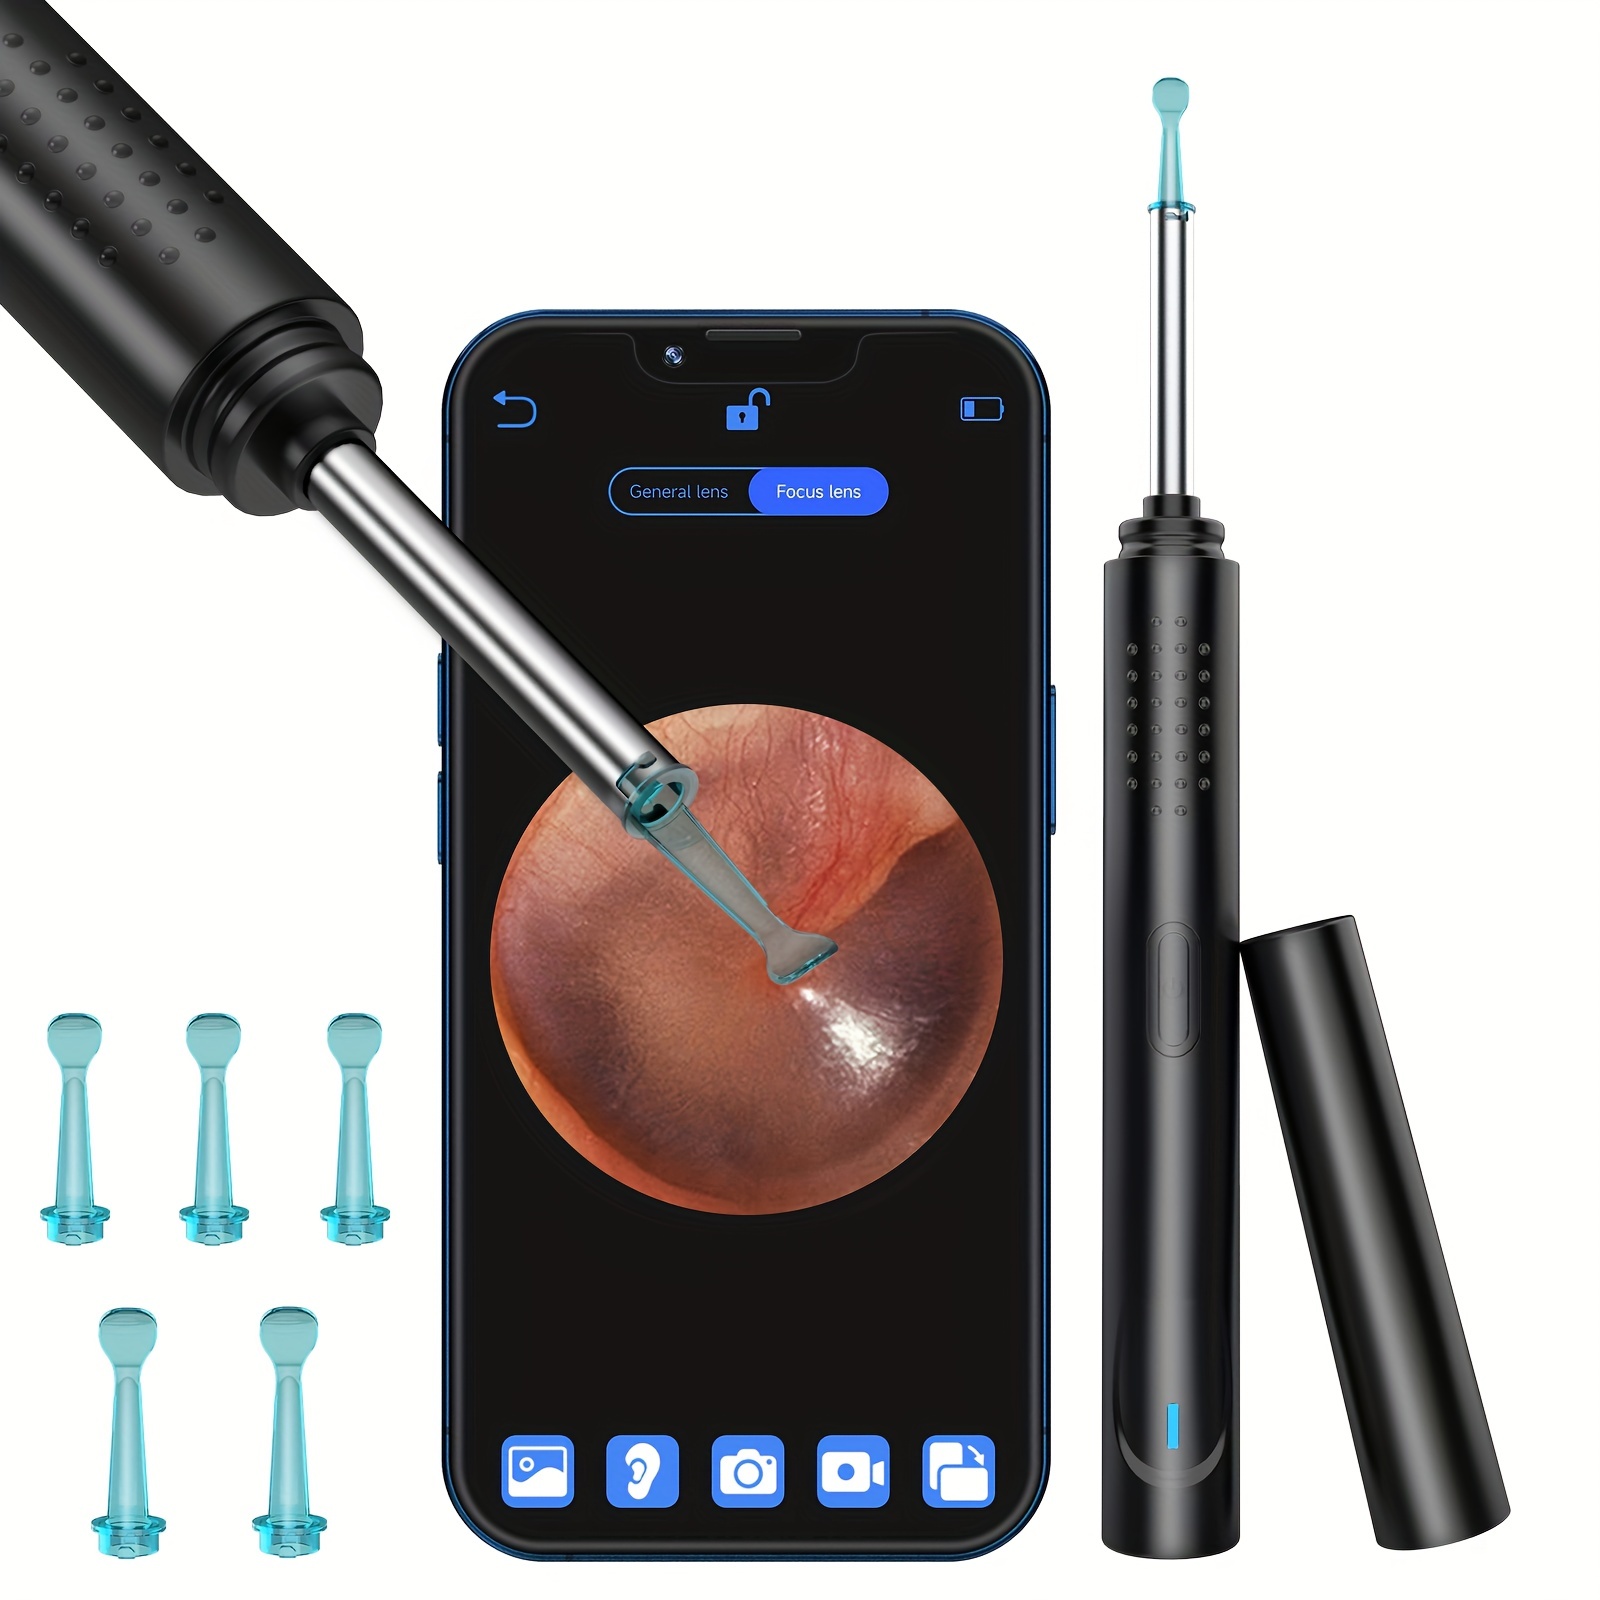 Ear Wax Removal Tool, Ear Cleaner With 1080p Camera, Ear Cleaning